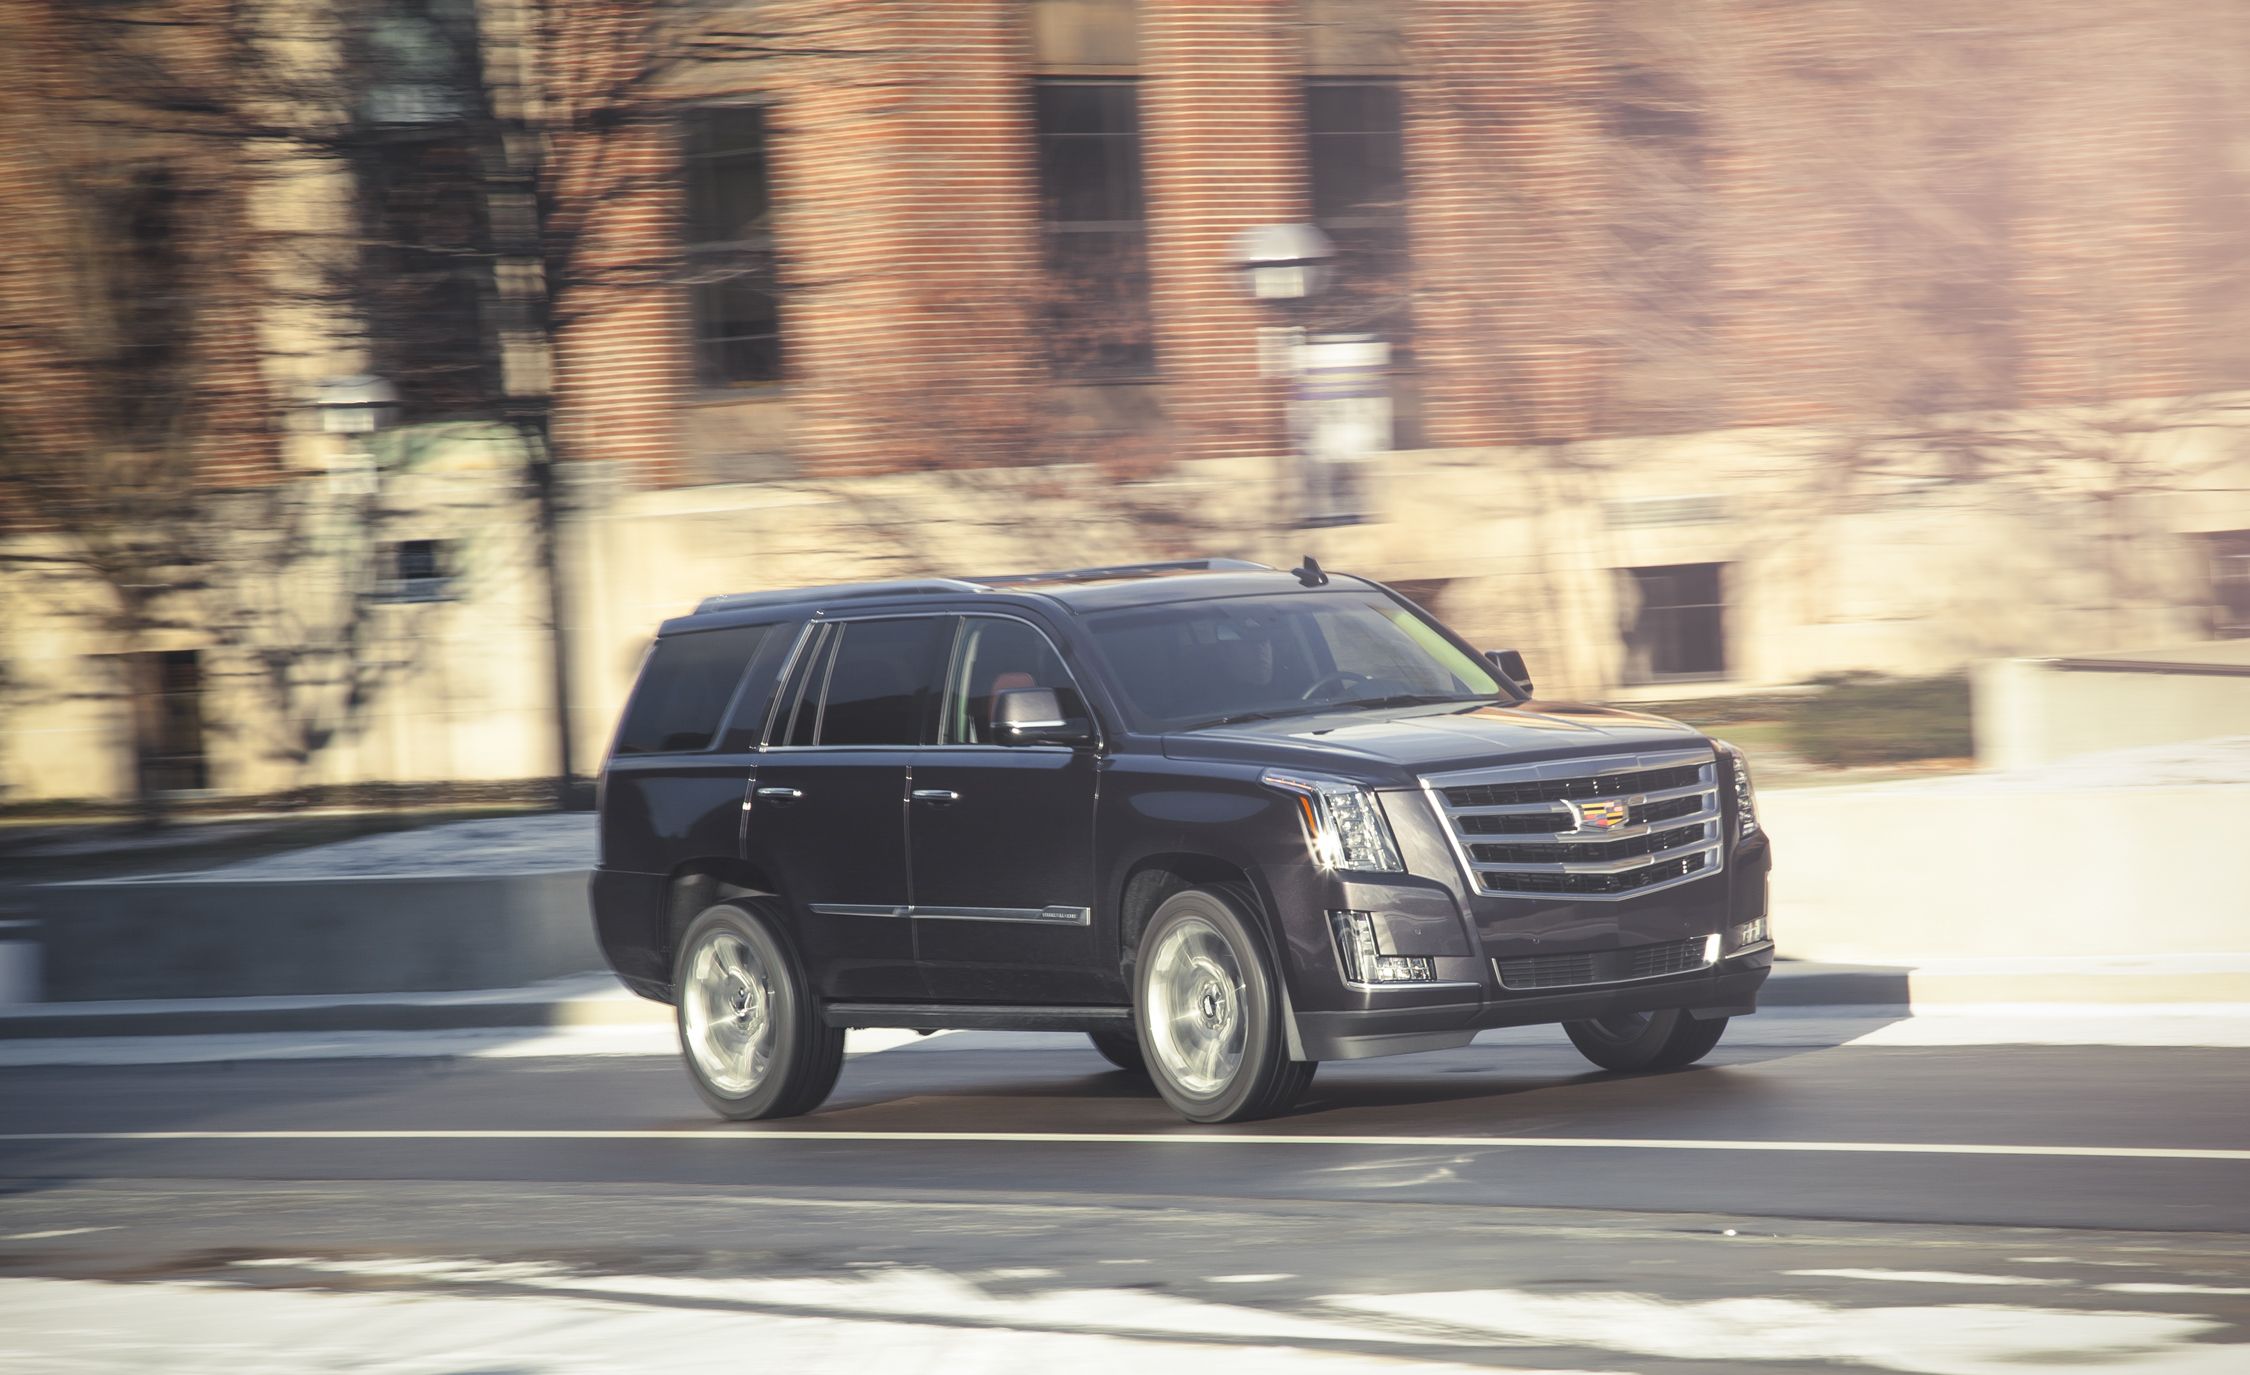 Tested: 2015 Cadillac Escalade with 8-Speed Automatic